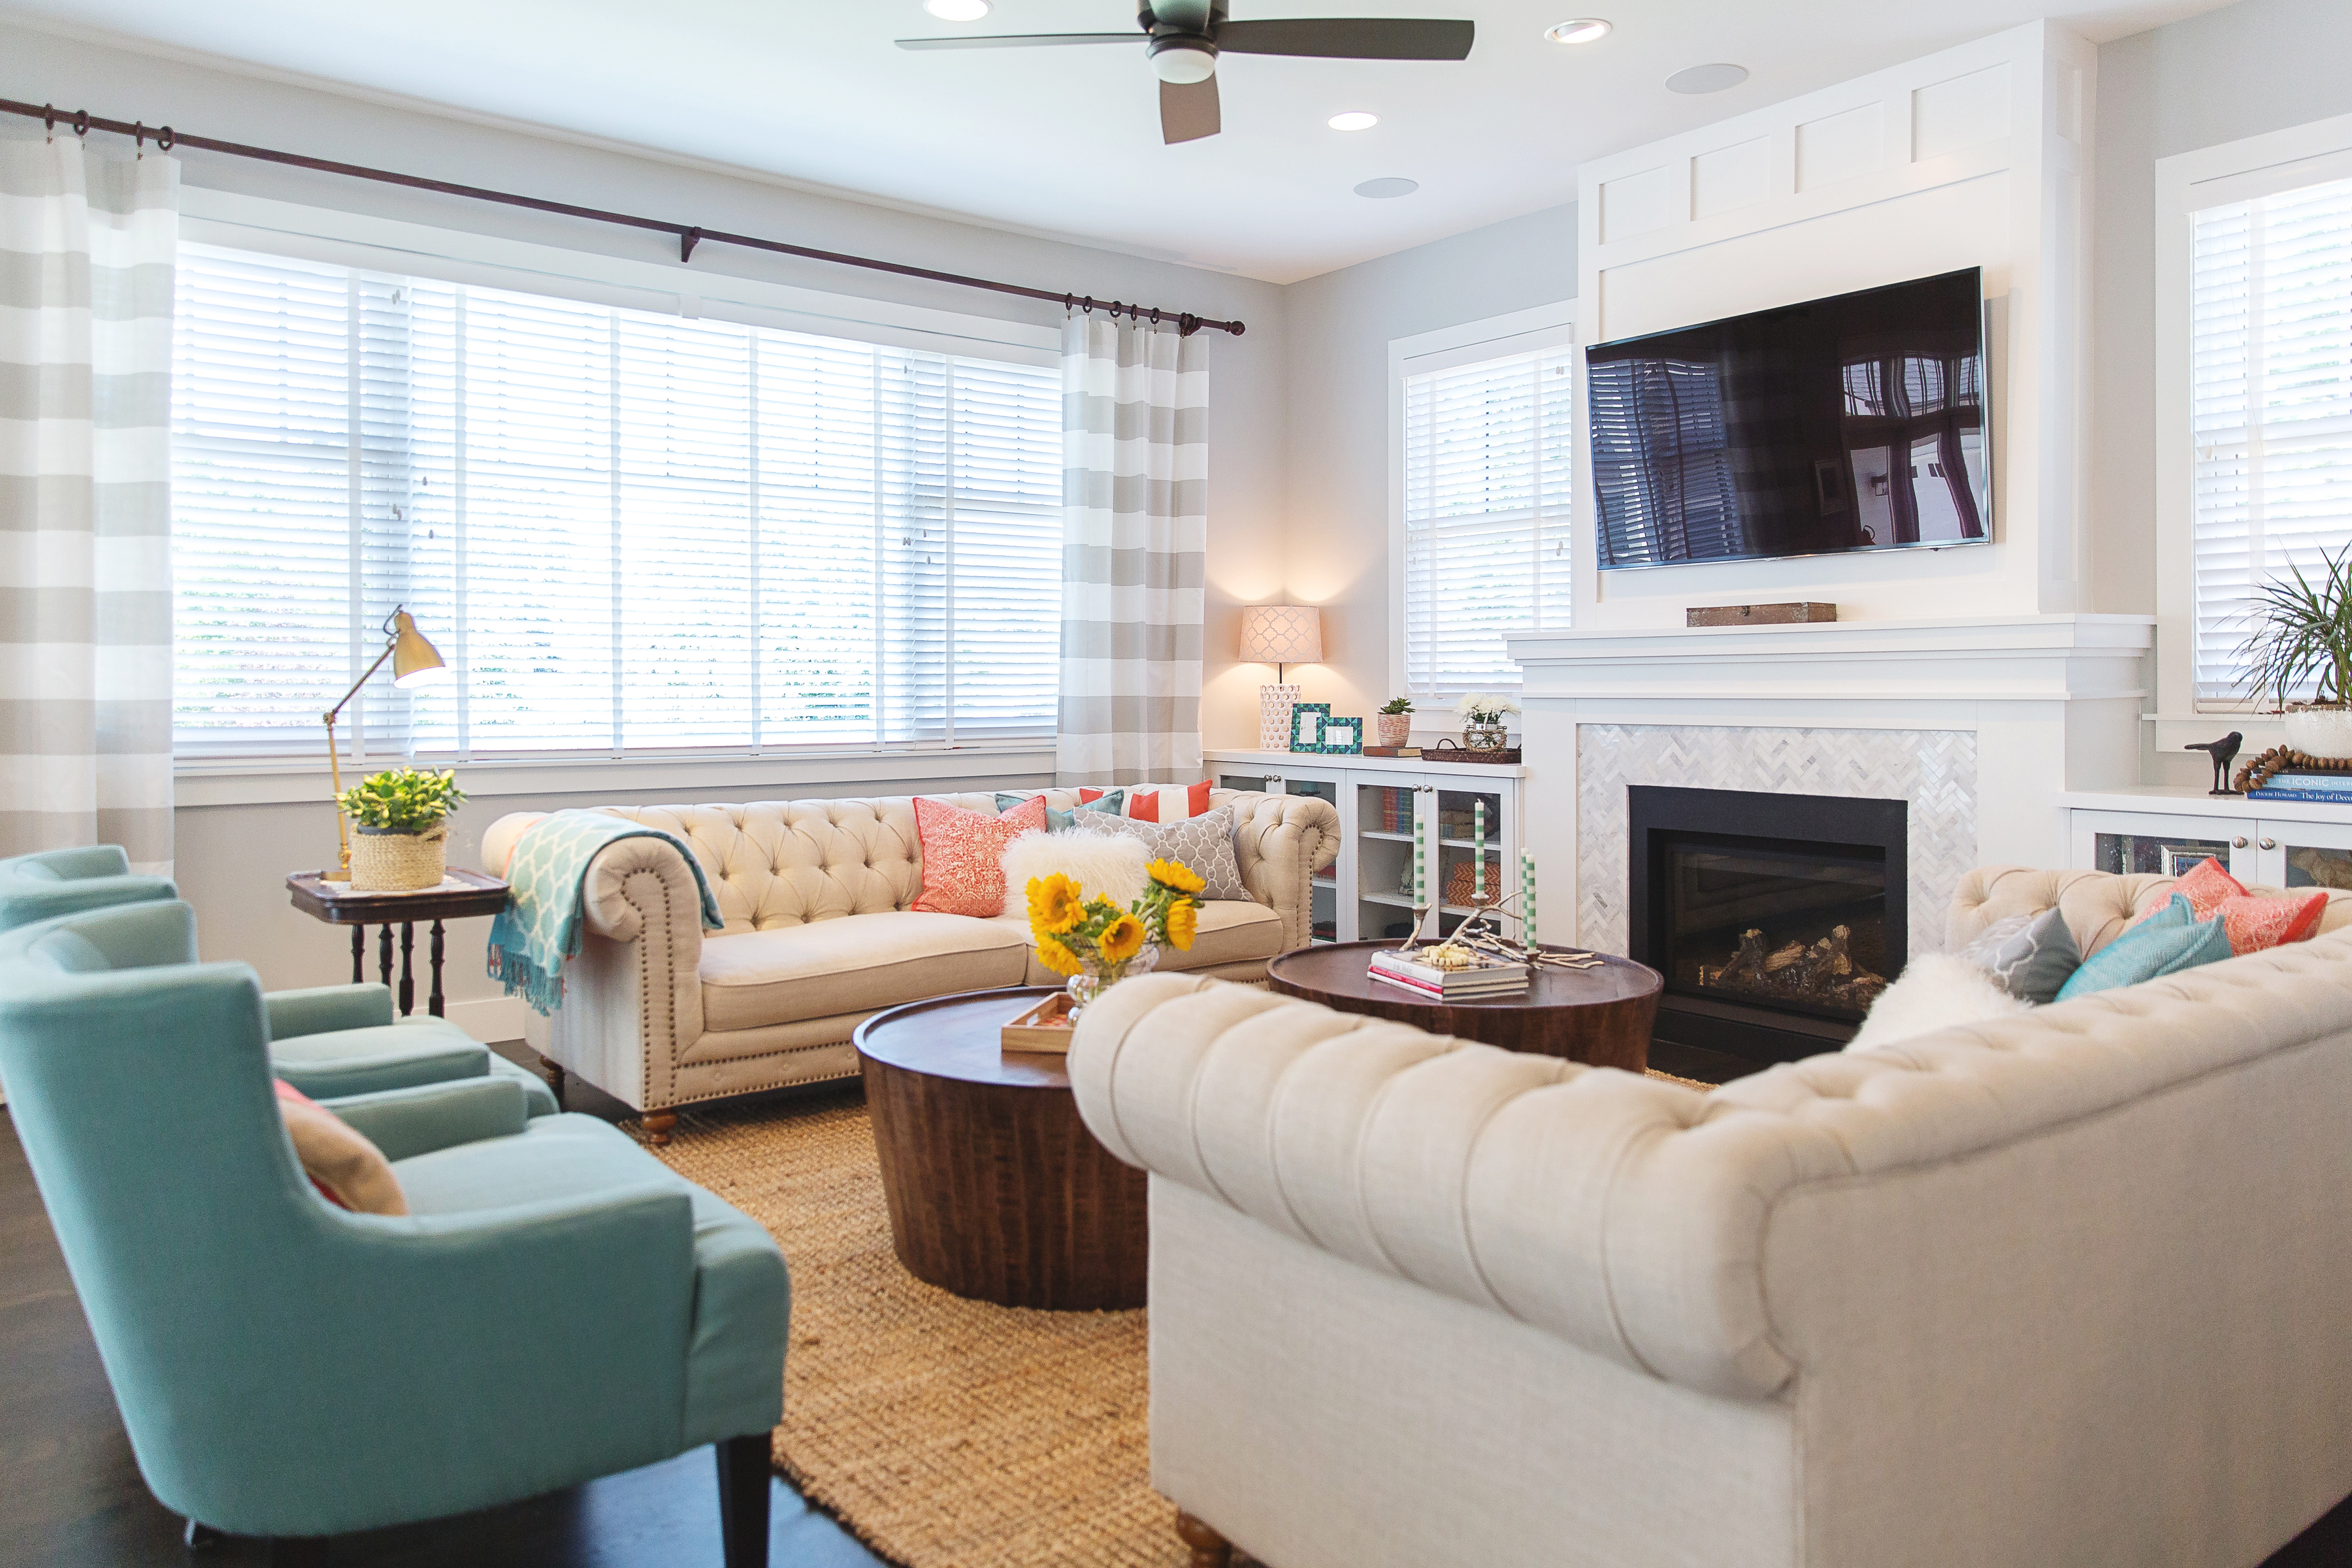 boise new home, north end new home, turquoise and coral interior, tufted sofas, boise interior design